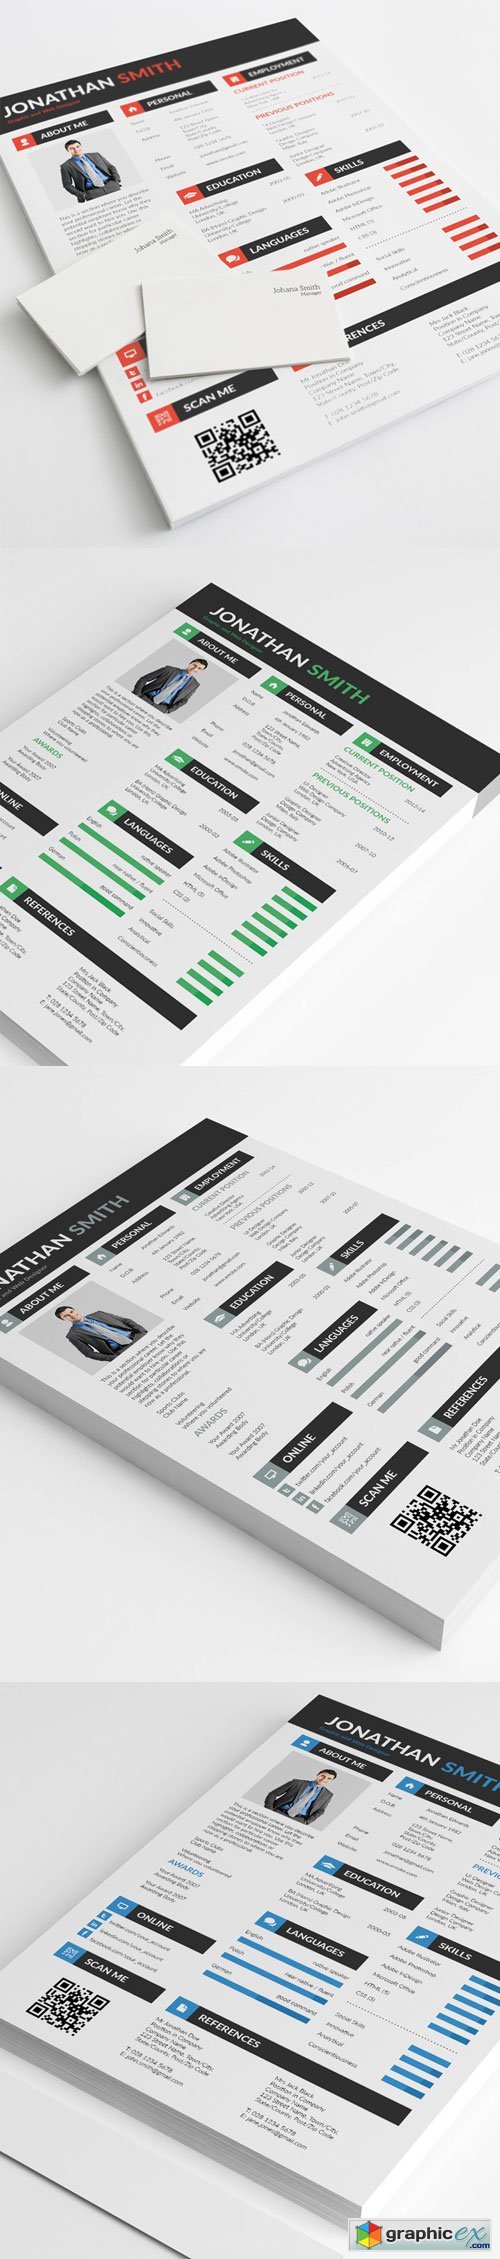 All in One PSD Resume Template